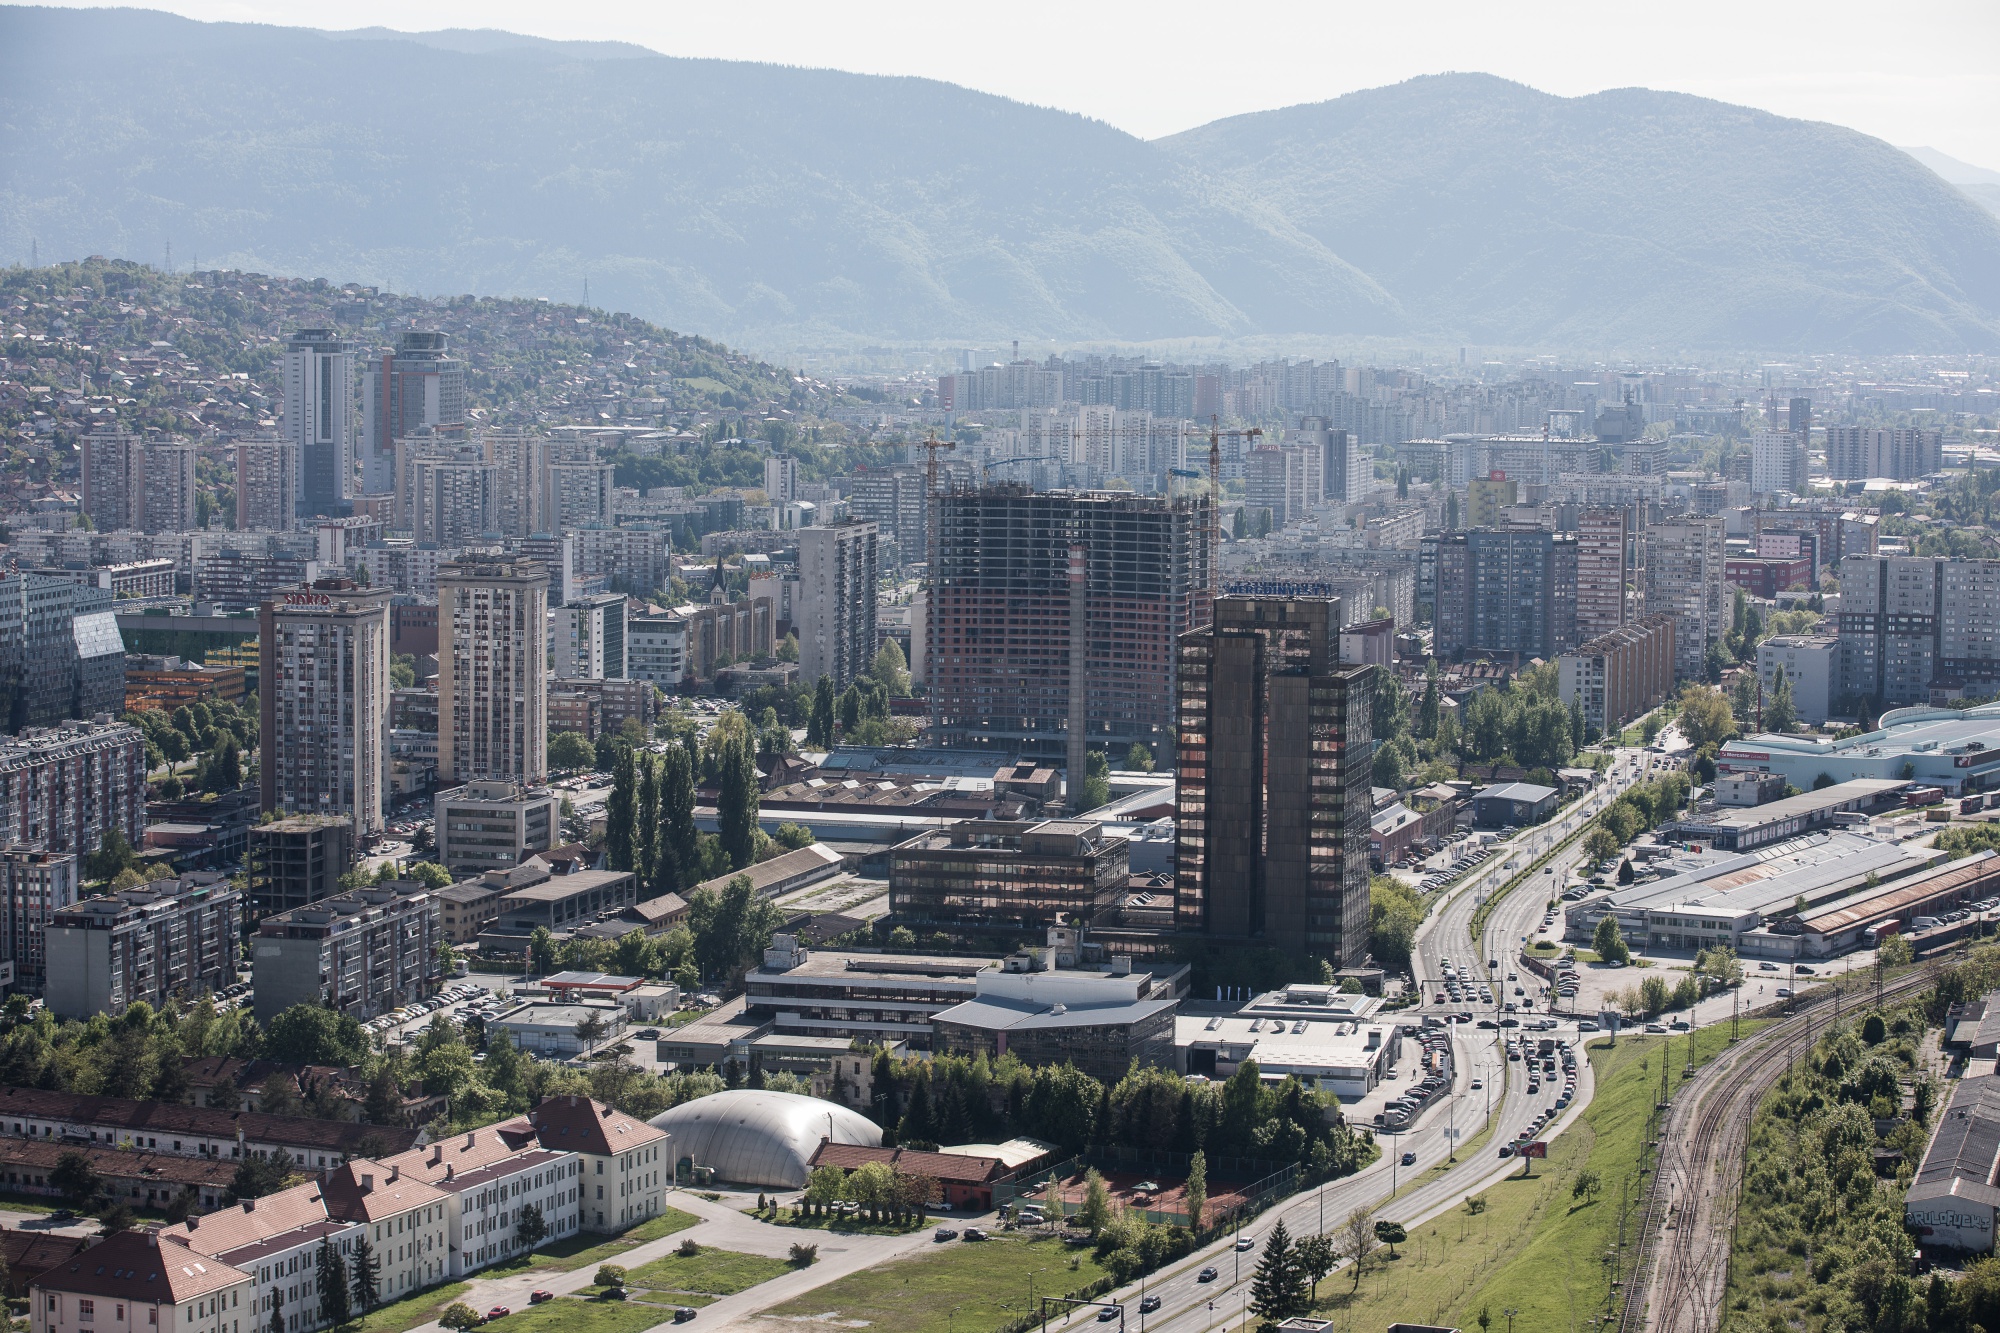 Daily Life in Bosnia's Largest City